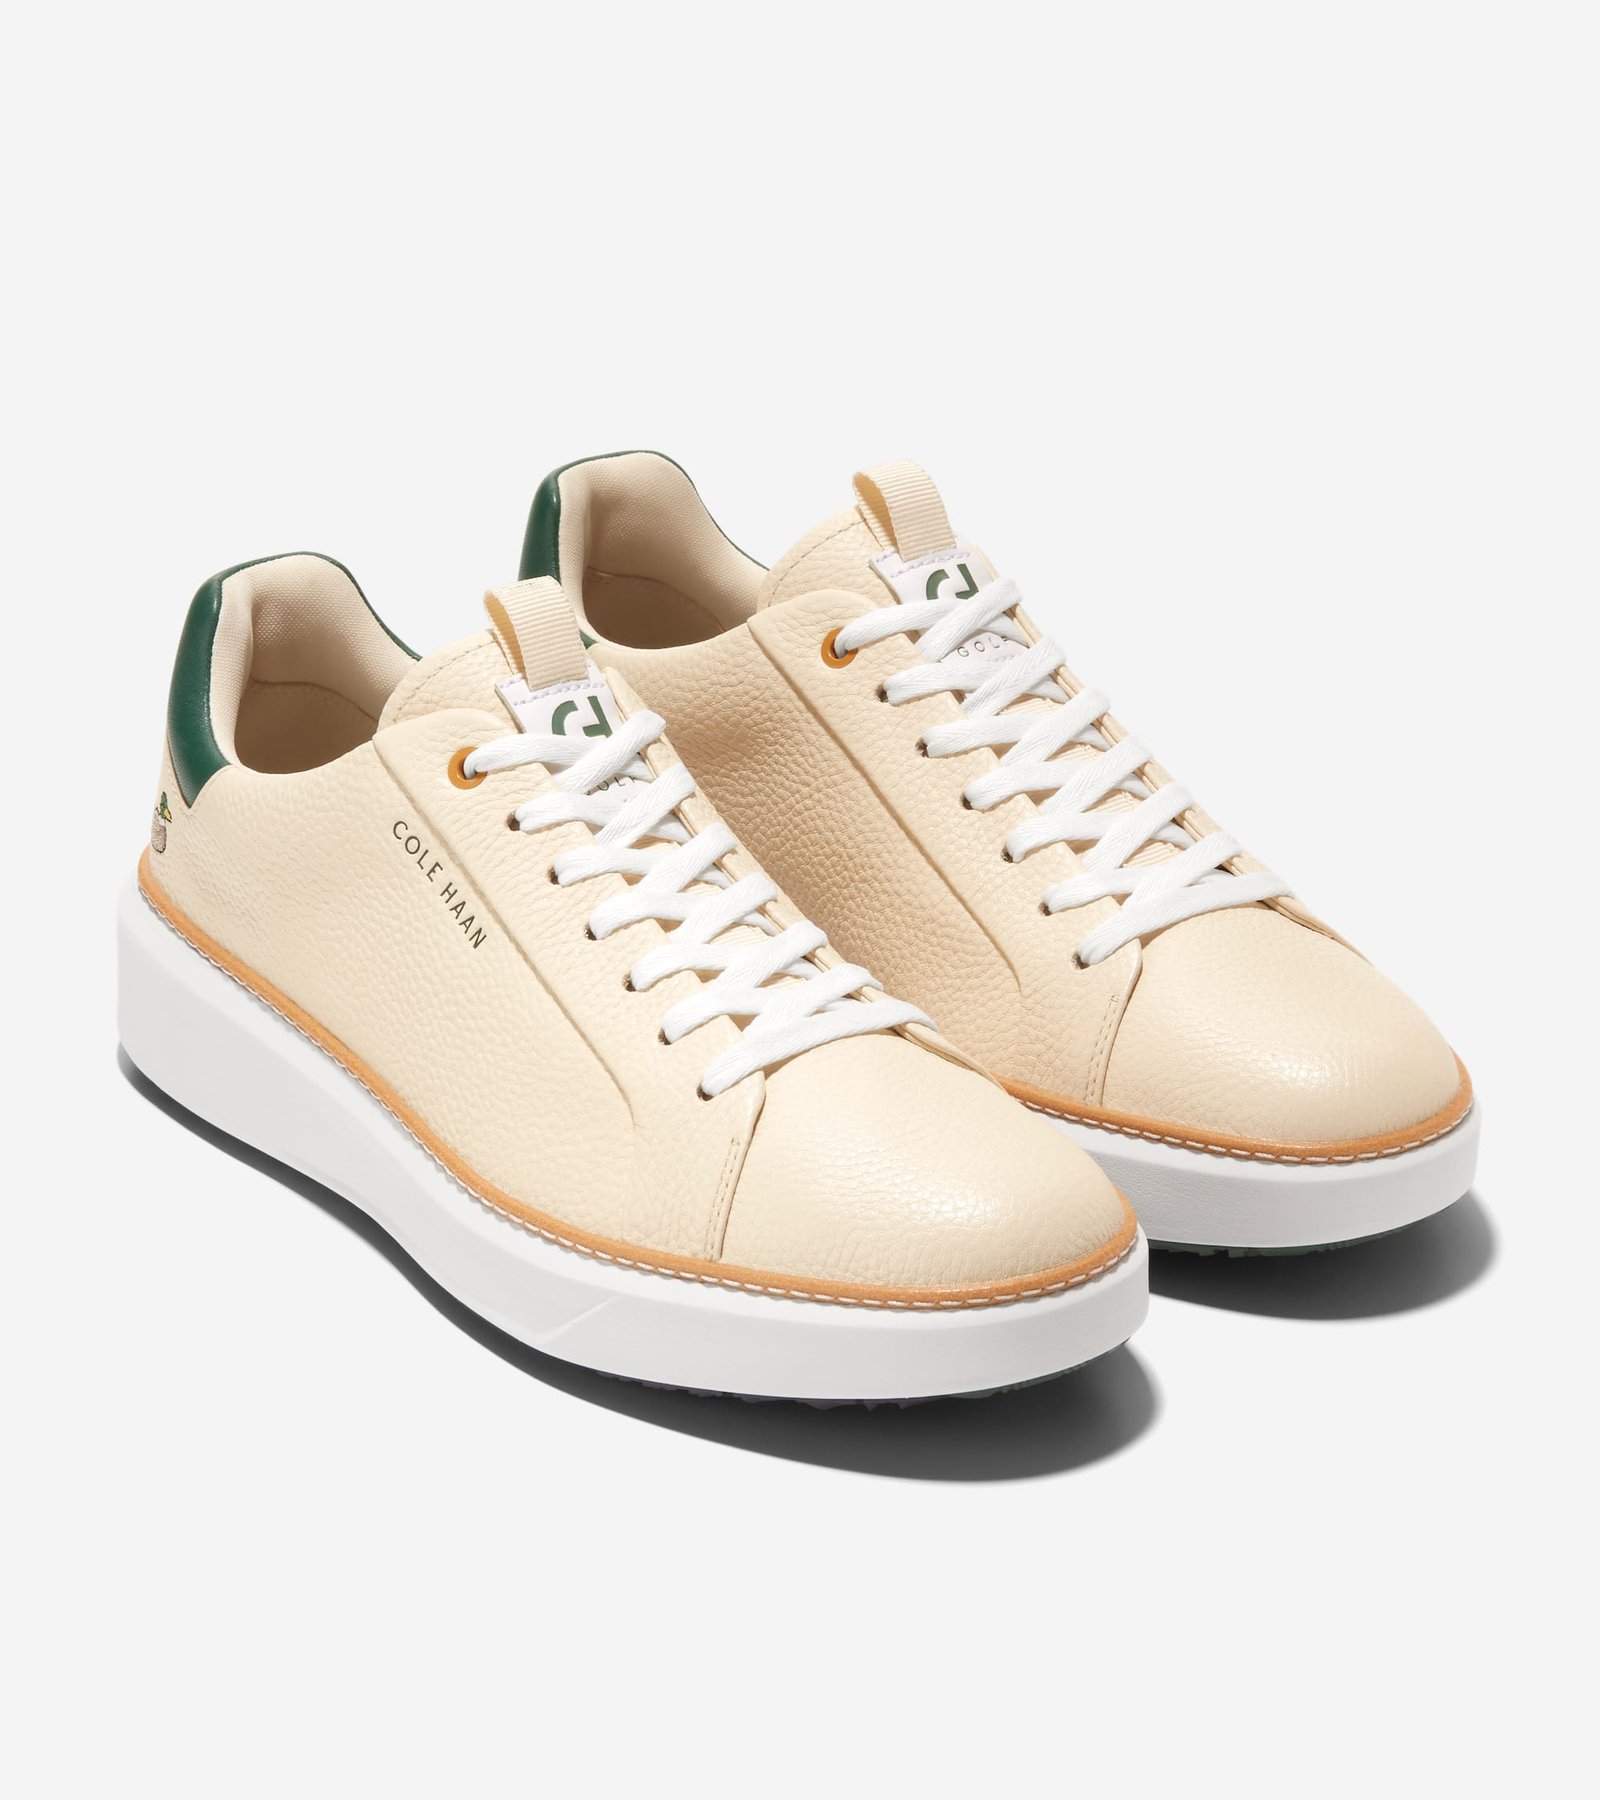 Cole Haan GrandPrø Topspin Golf Shoes